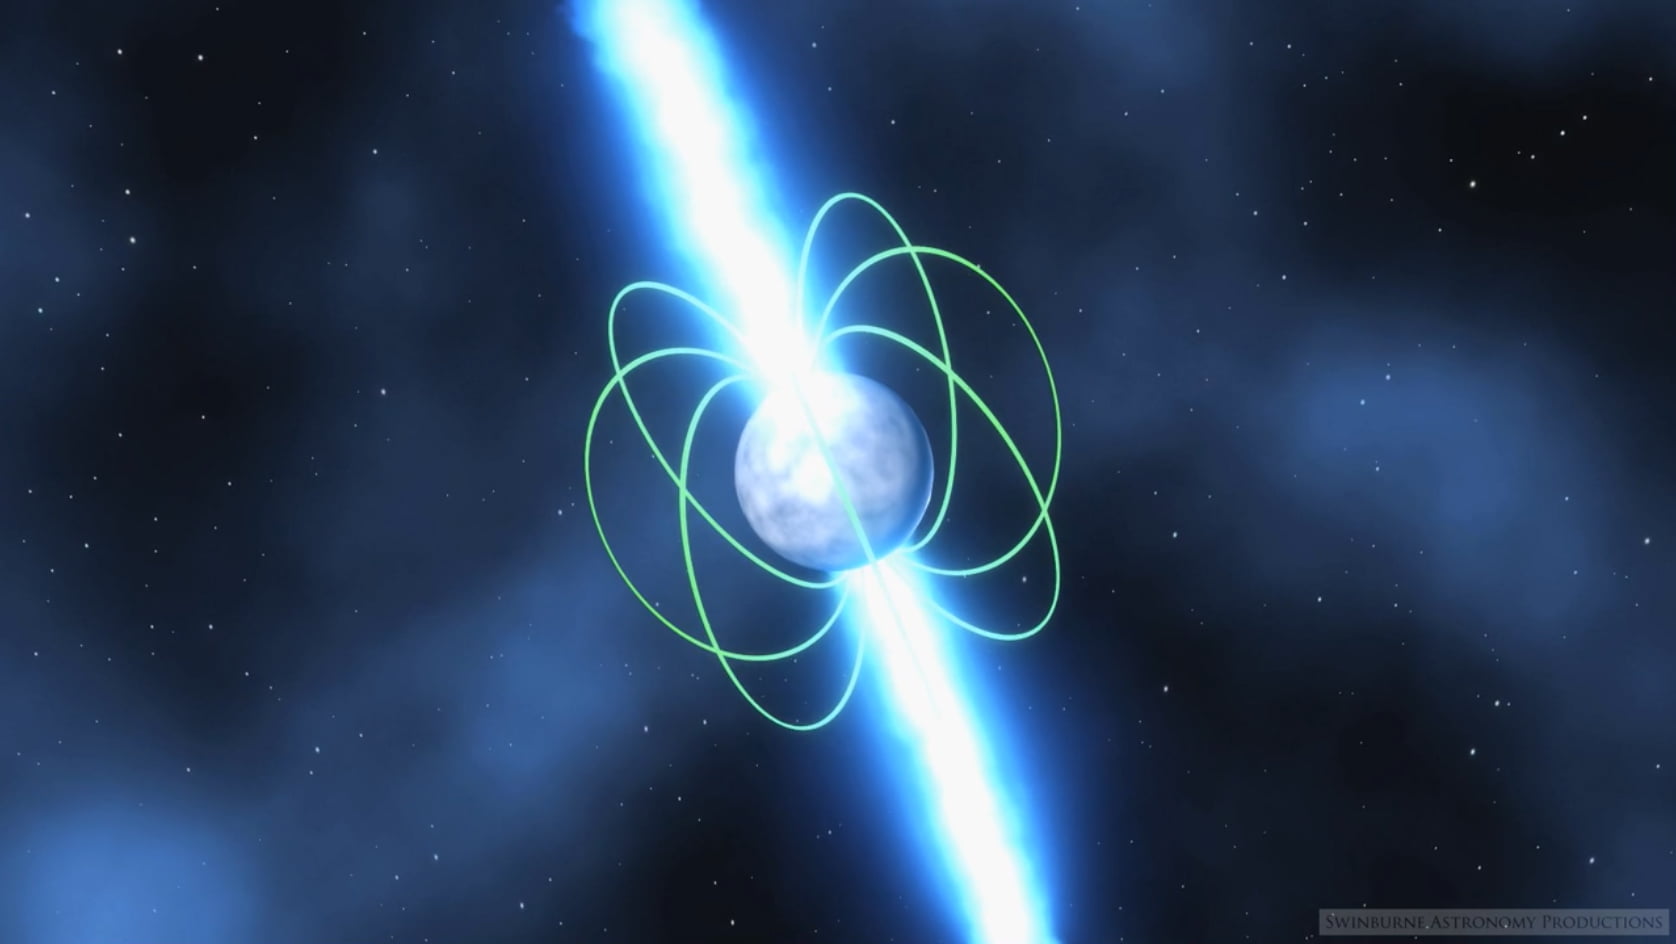 The densely packed matter of a pulsar spins at incredible speeds, and emits radio waves that can be observed from Earth, but how neutron stars emit these waves is still a mystery. Credit: Swinburne Astronomy Productions/CAASTRO.